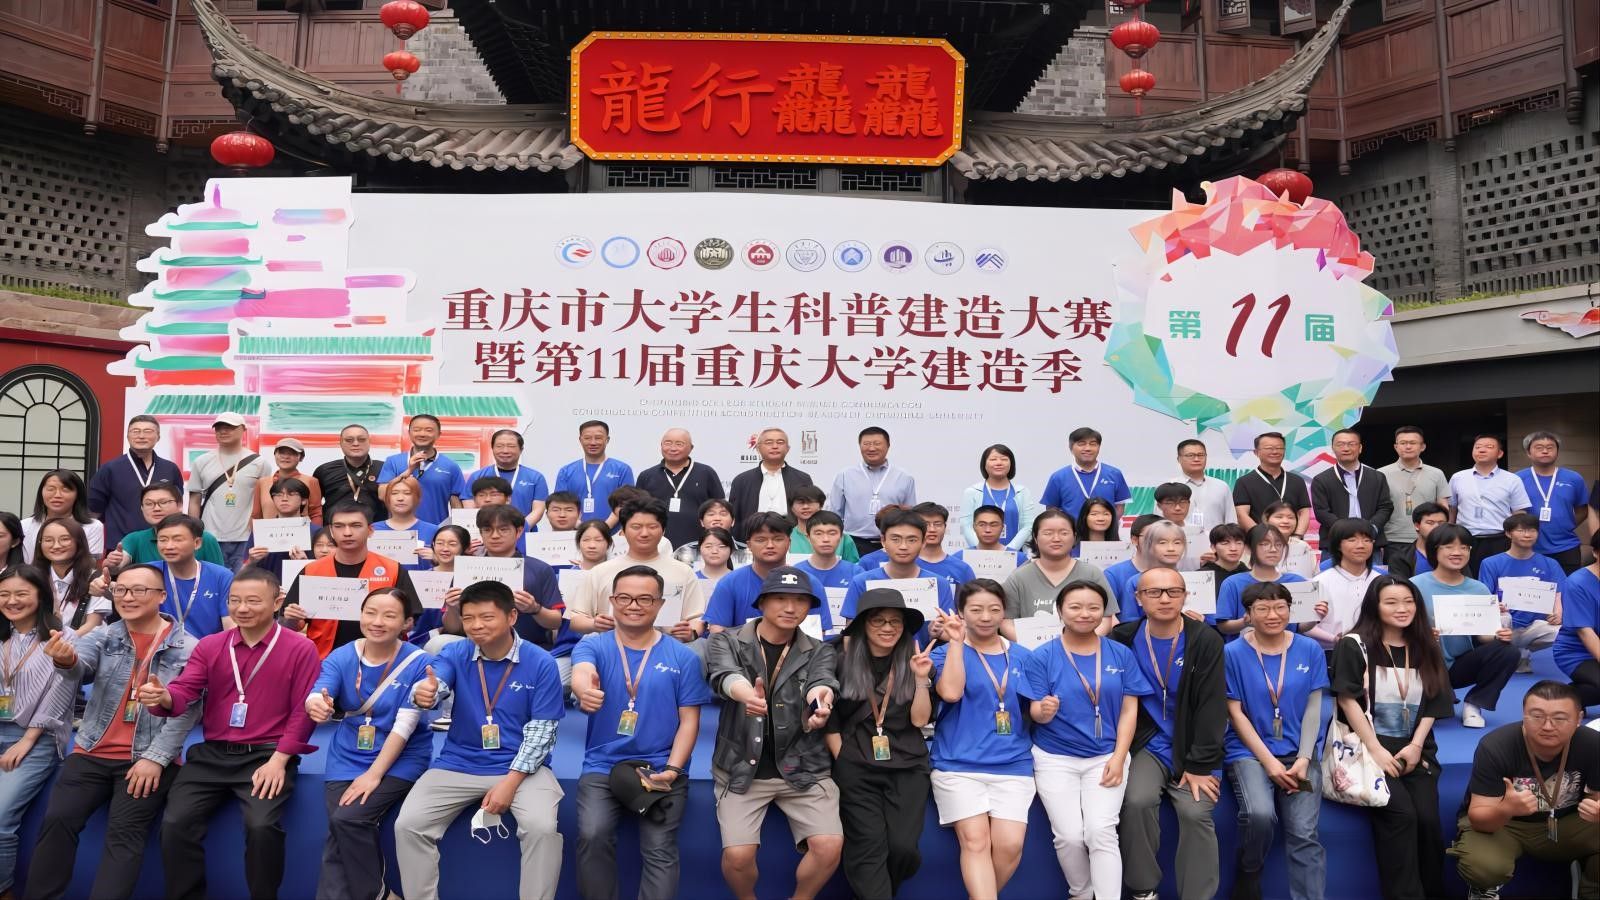 Chongqing College Student Science Communication Construction Competition & The 11th CQU Construction Season Conclude